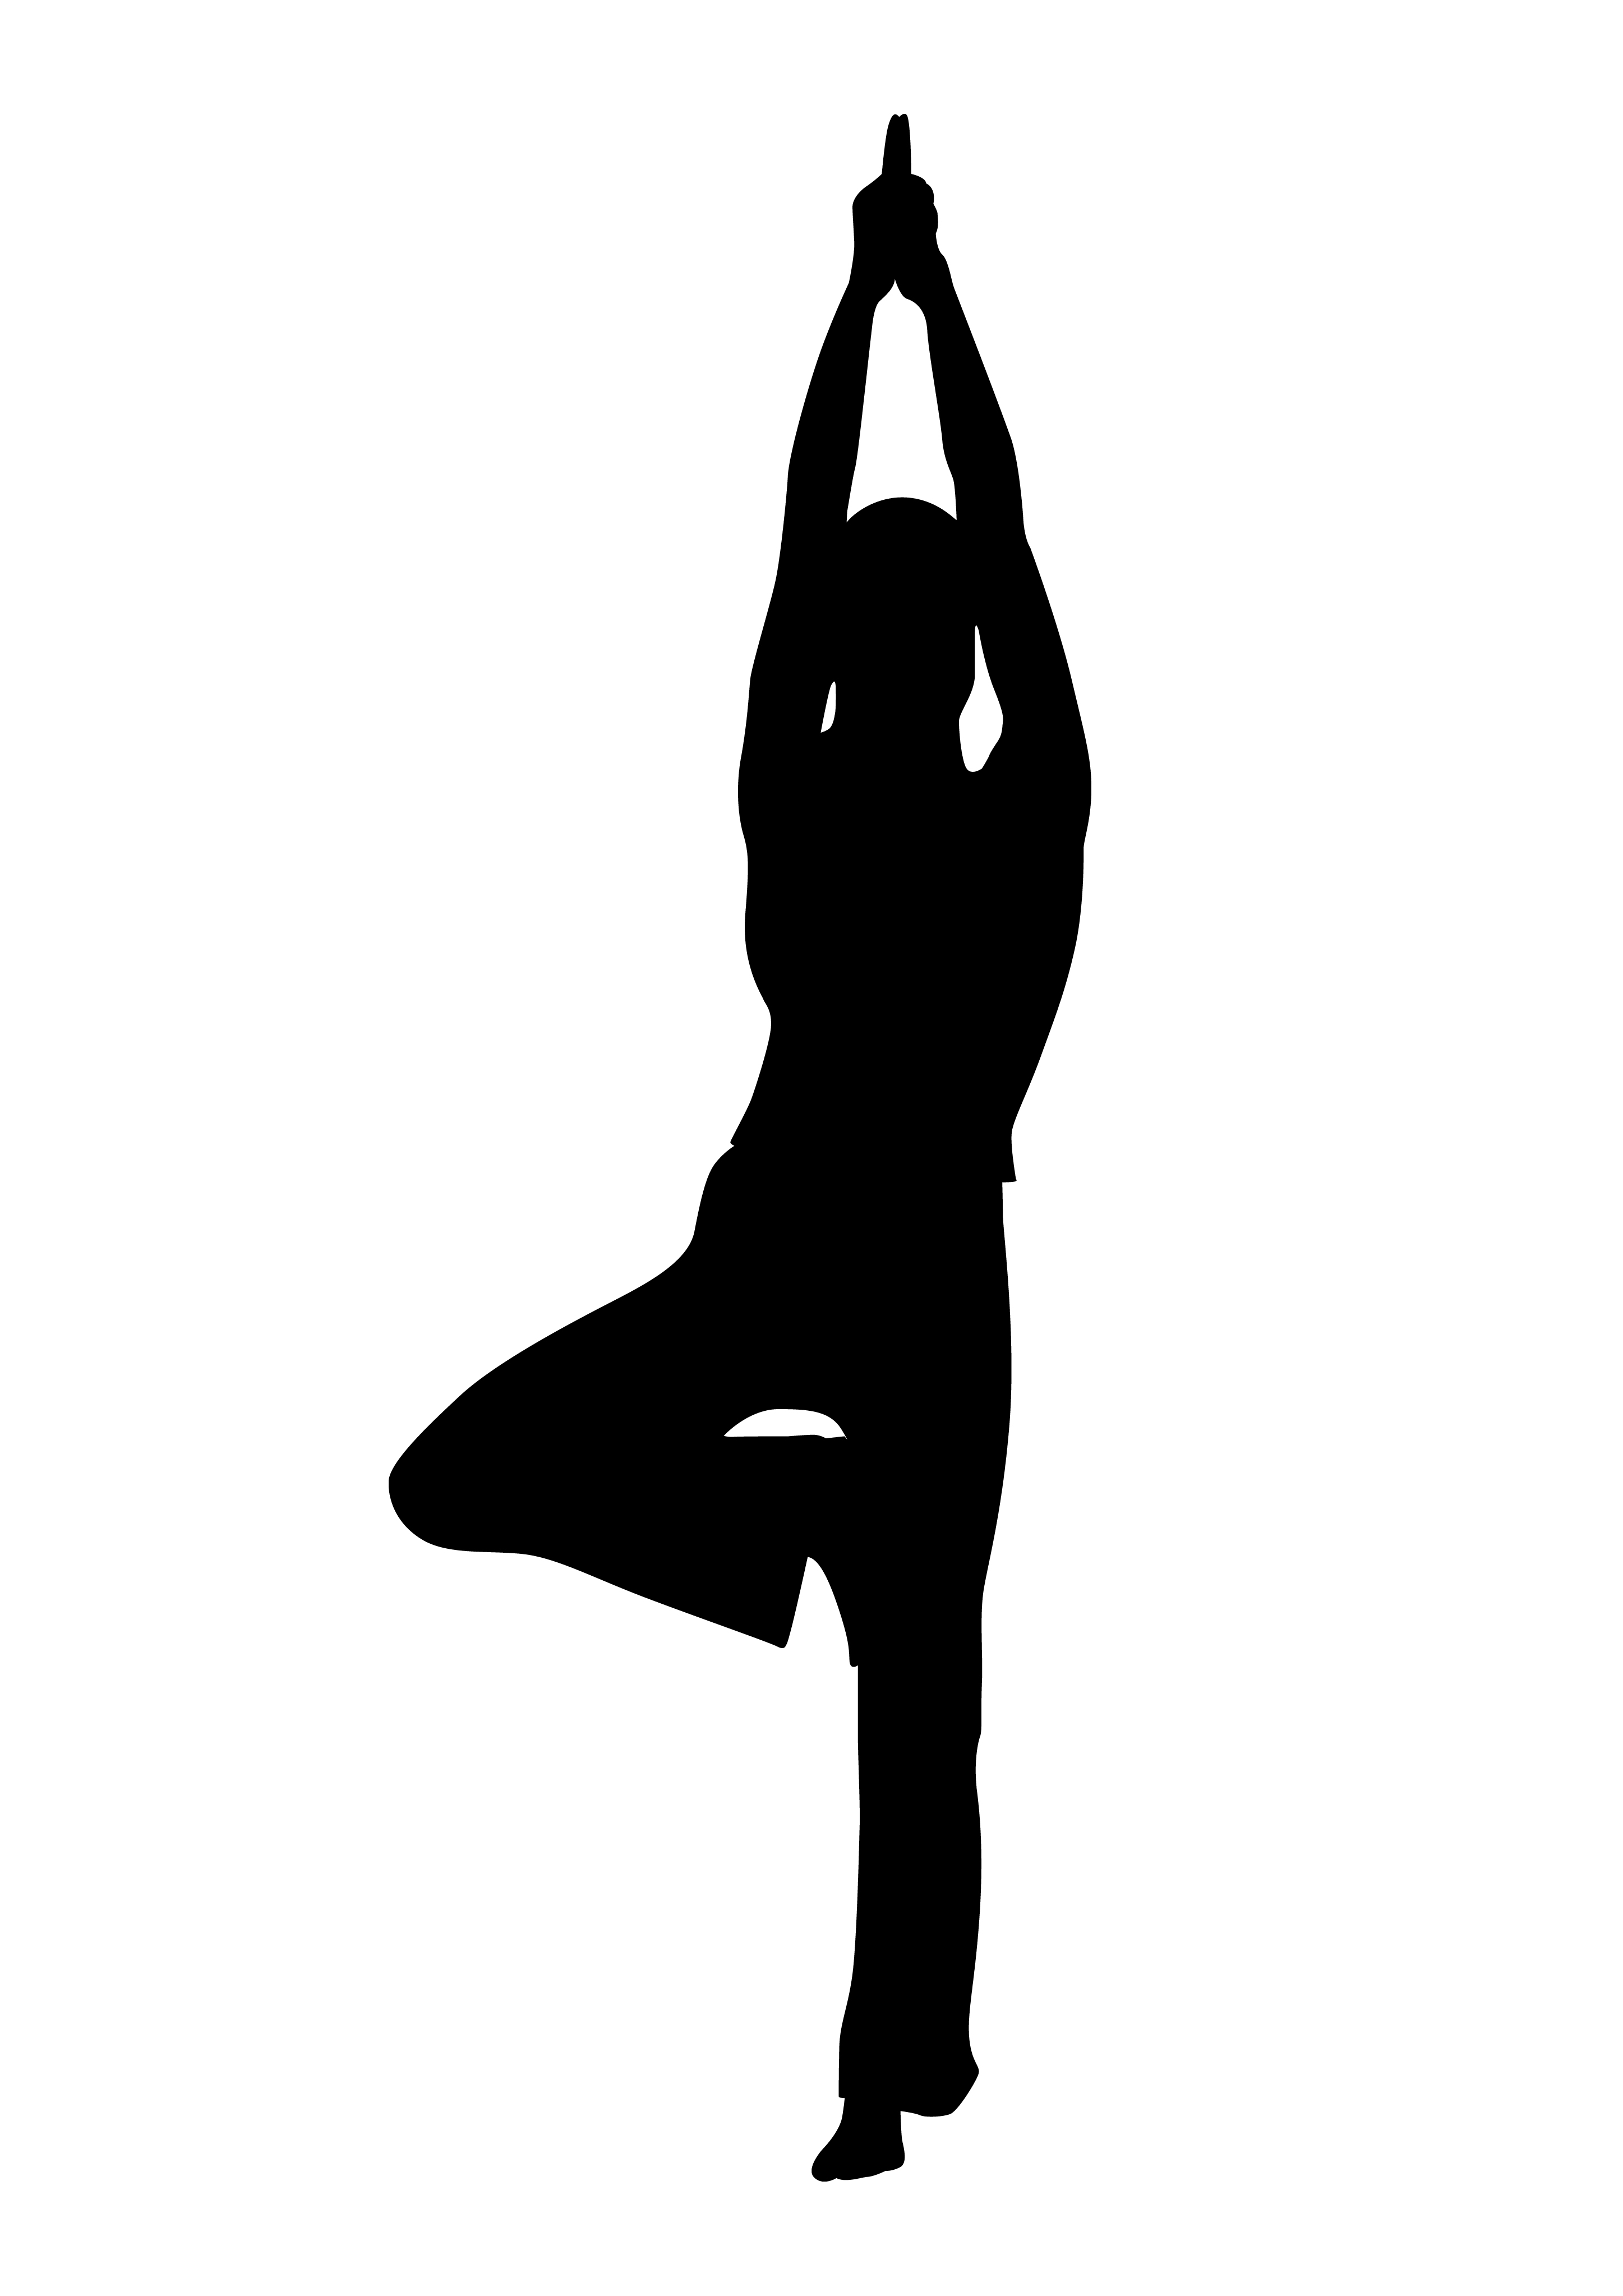 Yoga Pose White Silhouette On Black Background Royalty Free SVG, Cliparts,  Vectors, and Stock Illustration. Image 32407988.